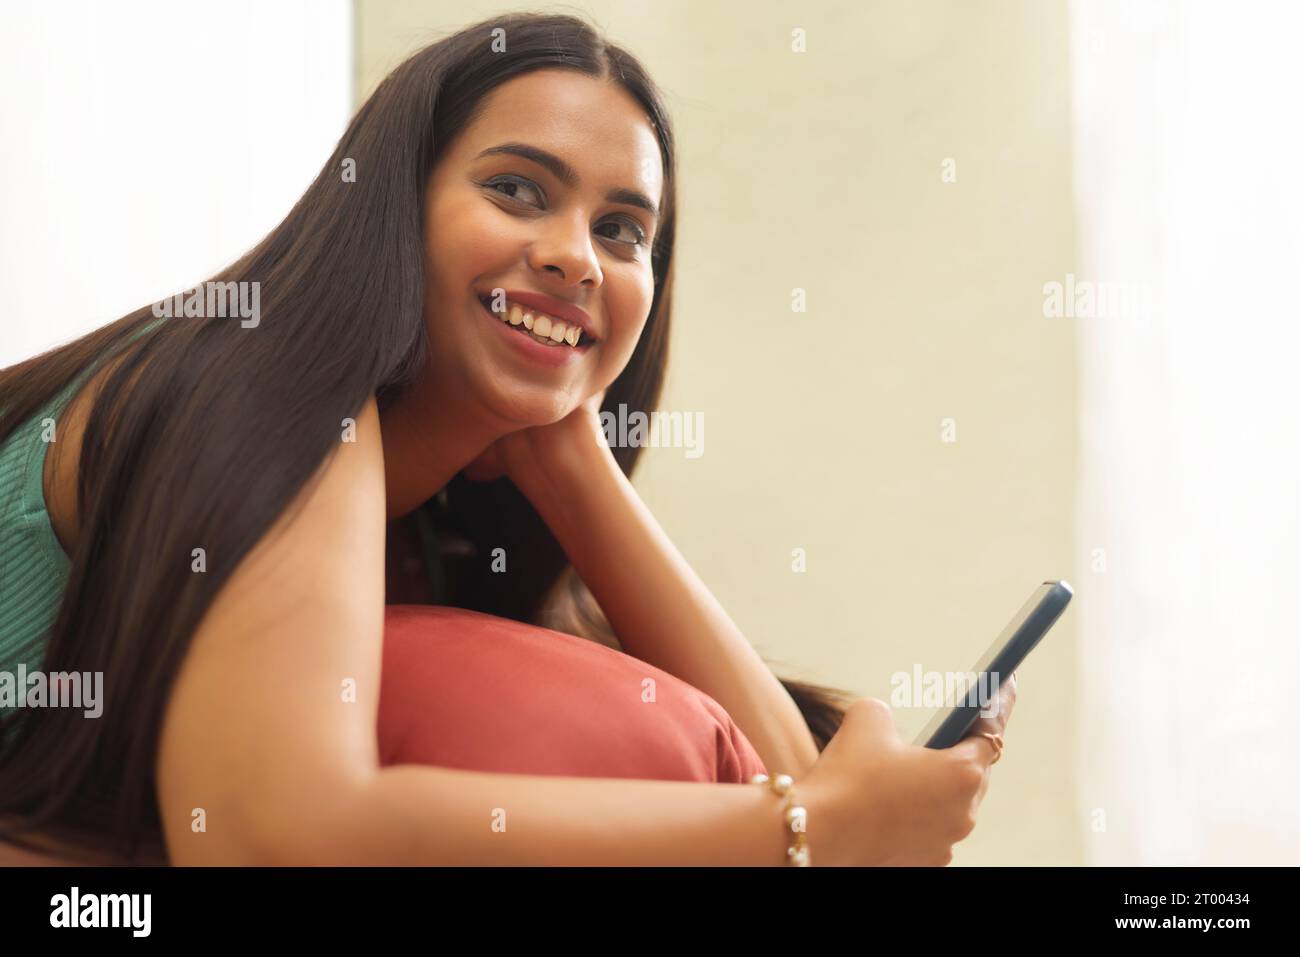 Close-up portrait of young woman using mobile phone while relaxing in hotel room Stock Photo